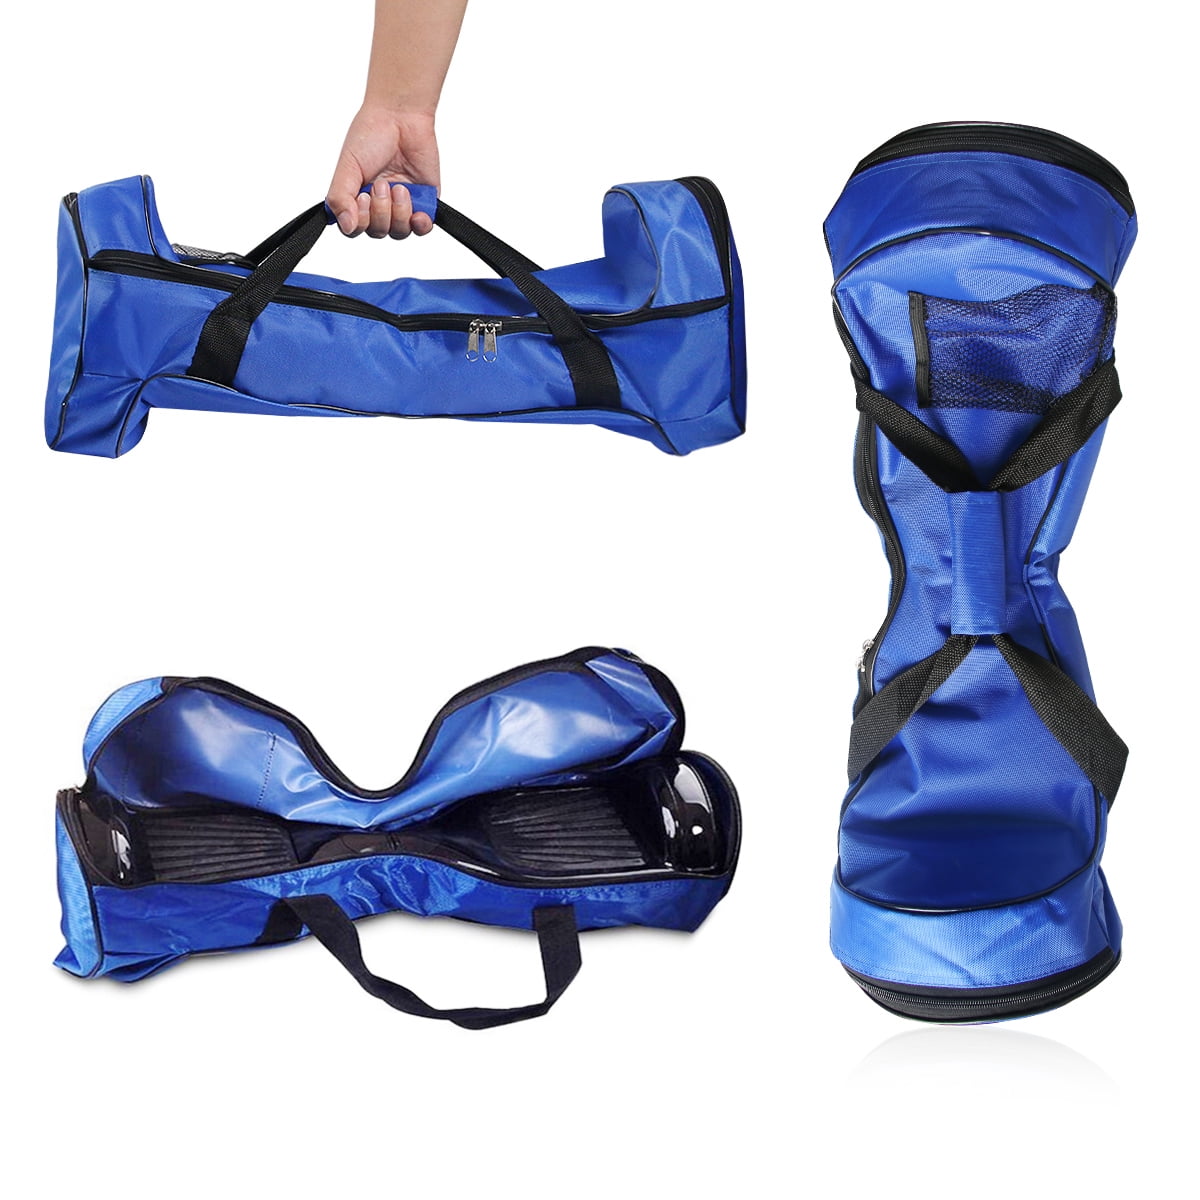 Carrier Bag for 2 Wheels Self Balancing Electric Scooter Blue 